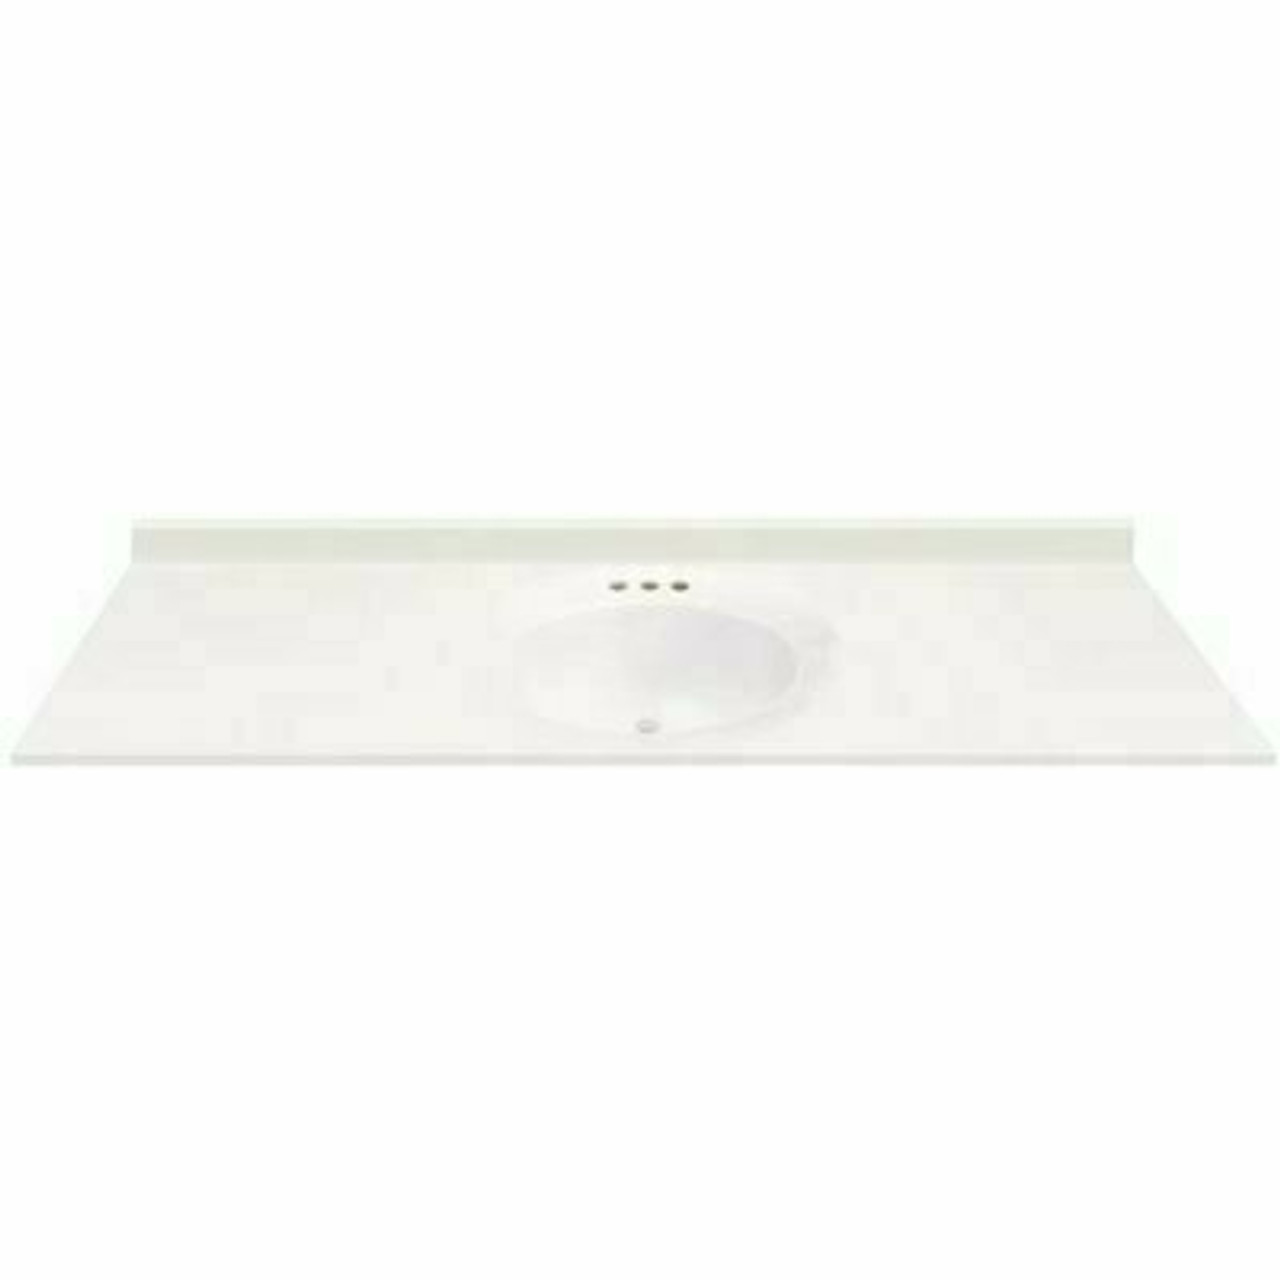 Magickwoods 61 In. W X 19 In. D Cultured Marble Oval Recessed Single Basin Vanity Top In White With White Basin